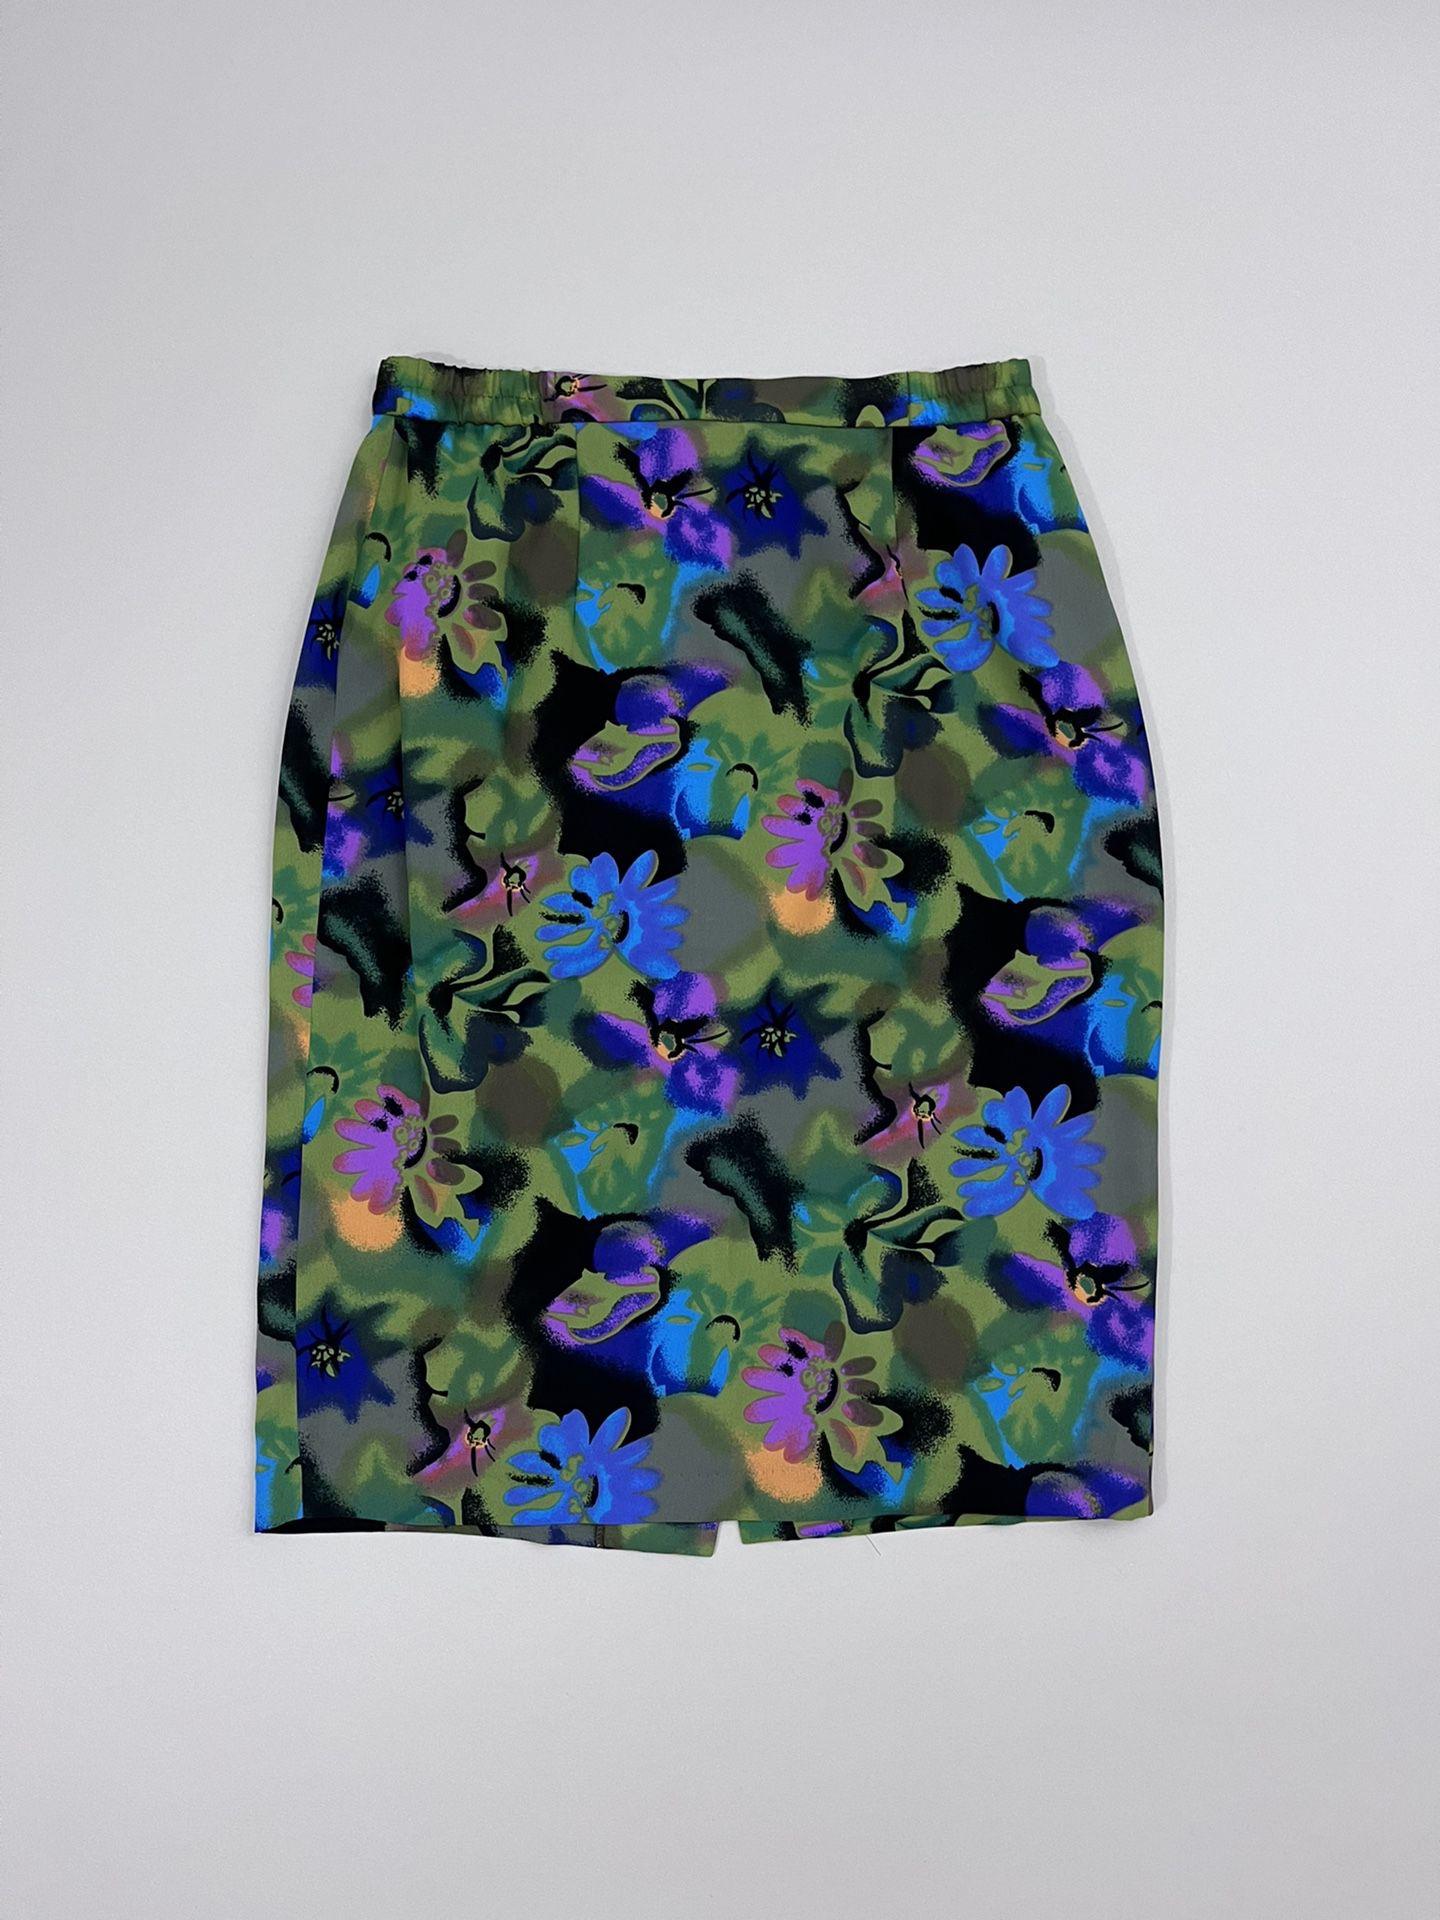 Vintage 80s Skirt floral Print Pencil Skirt Green Multi Colored Size 11